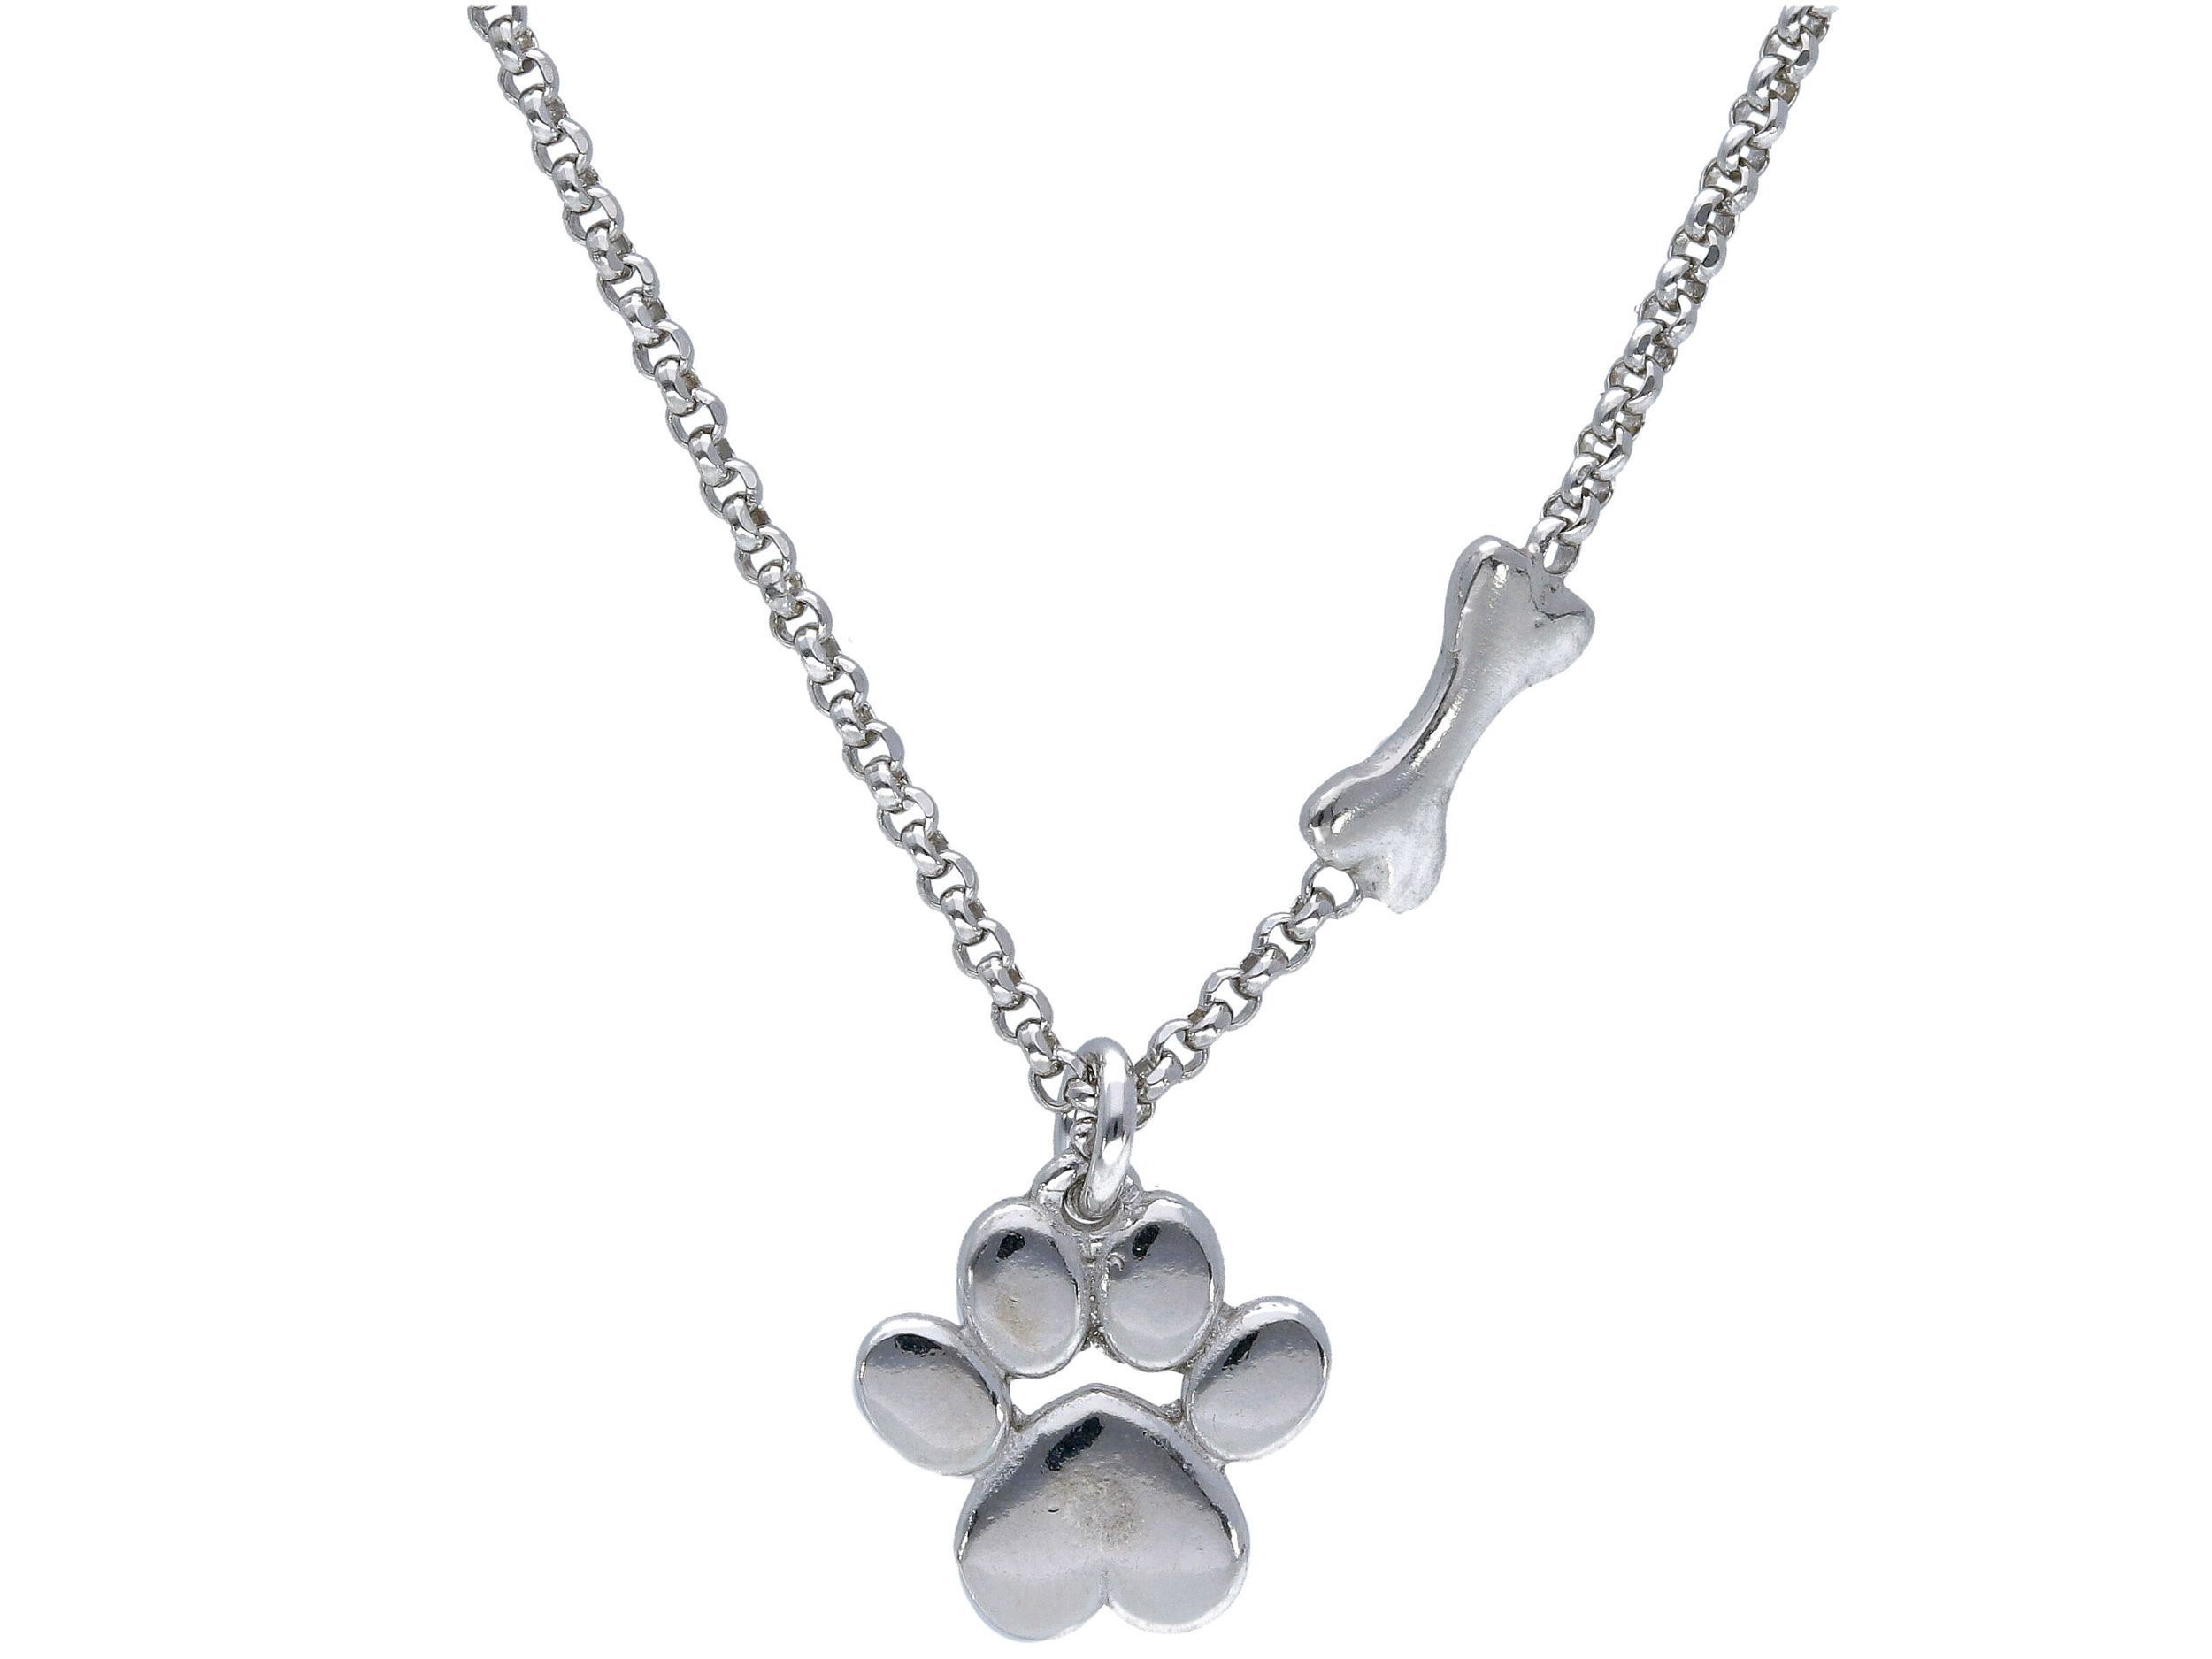  Platinum plated silver 925° necklace (code S256629)